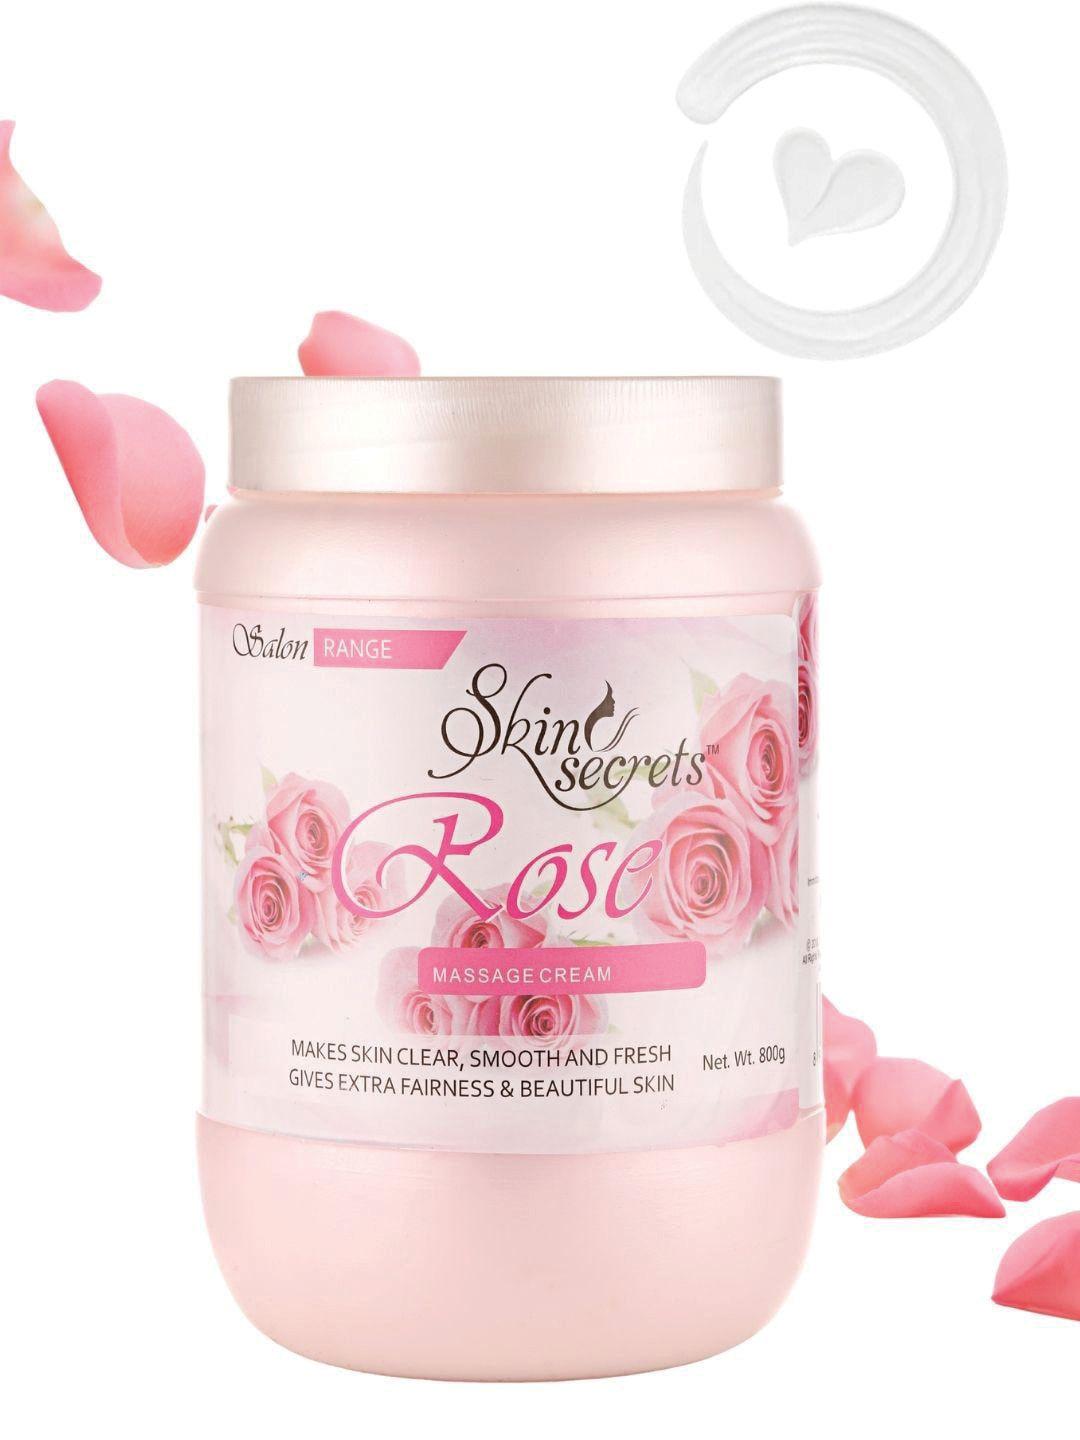 skin secrets cruelty free & non toxic rose massage cream for clear & smooth skin - 800 g